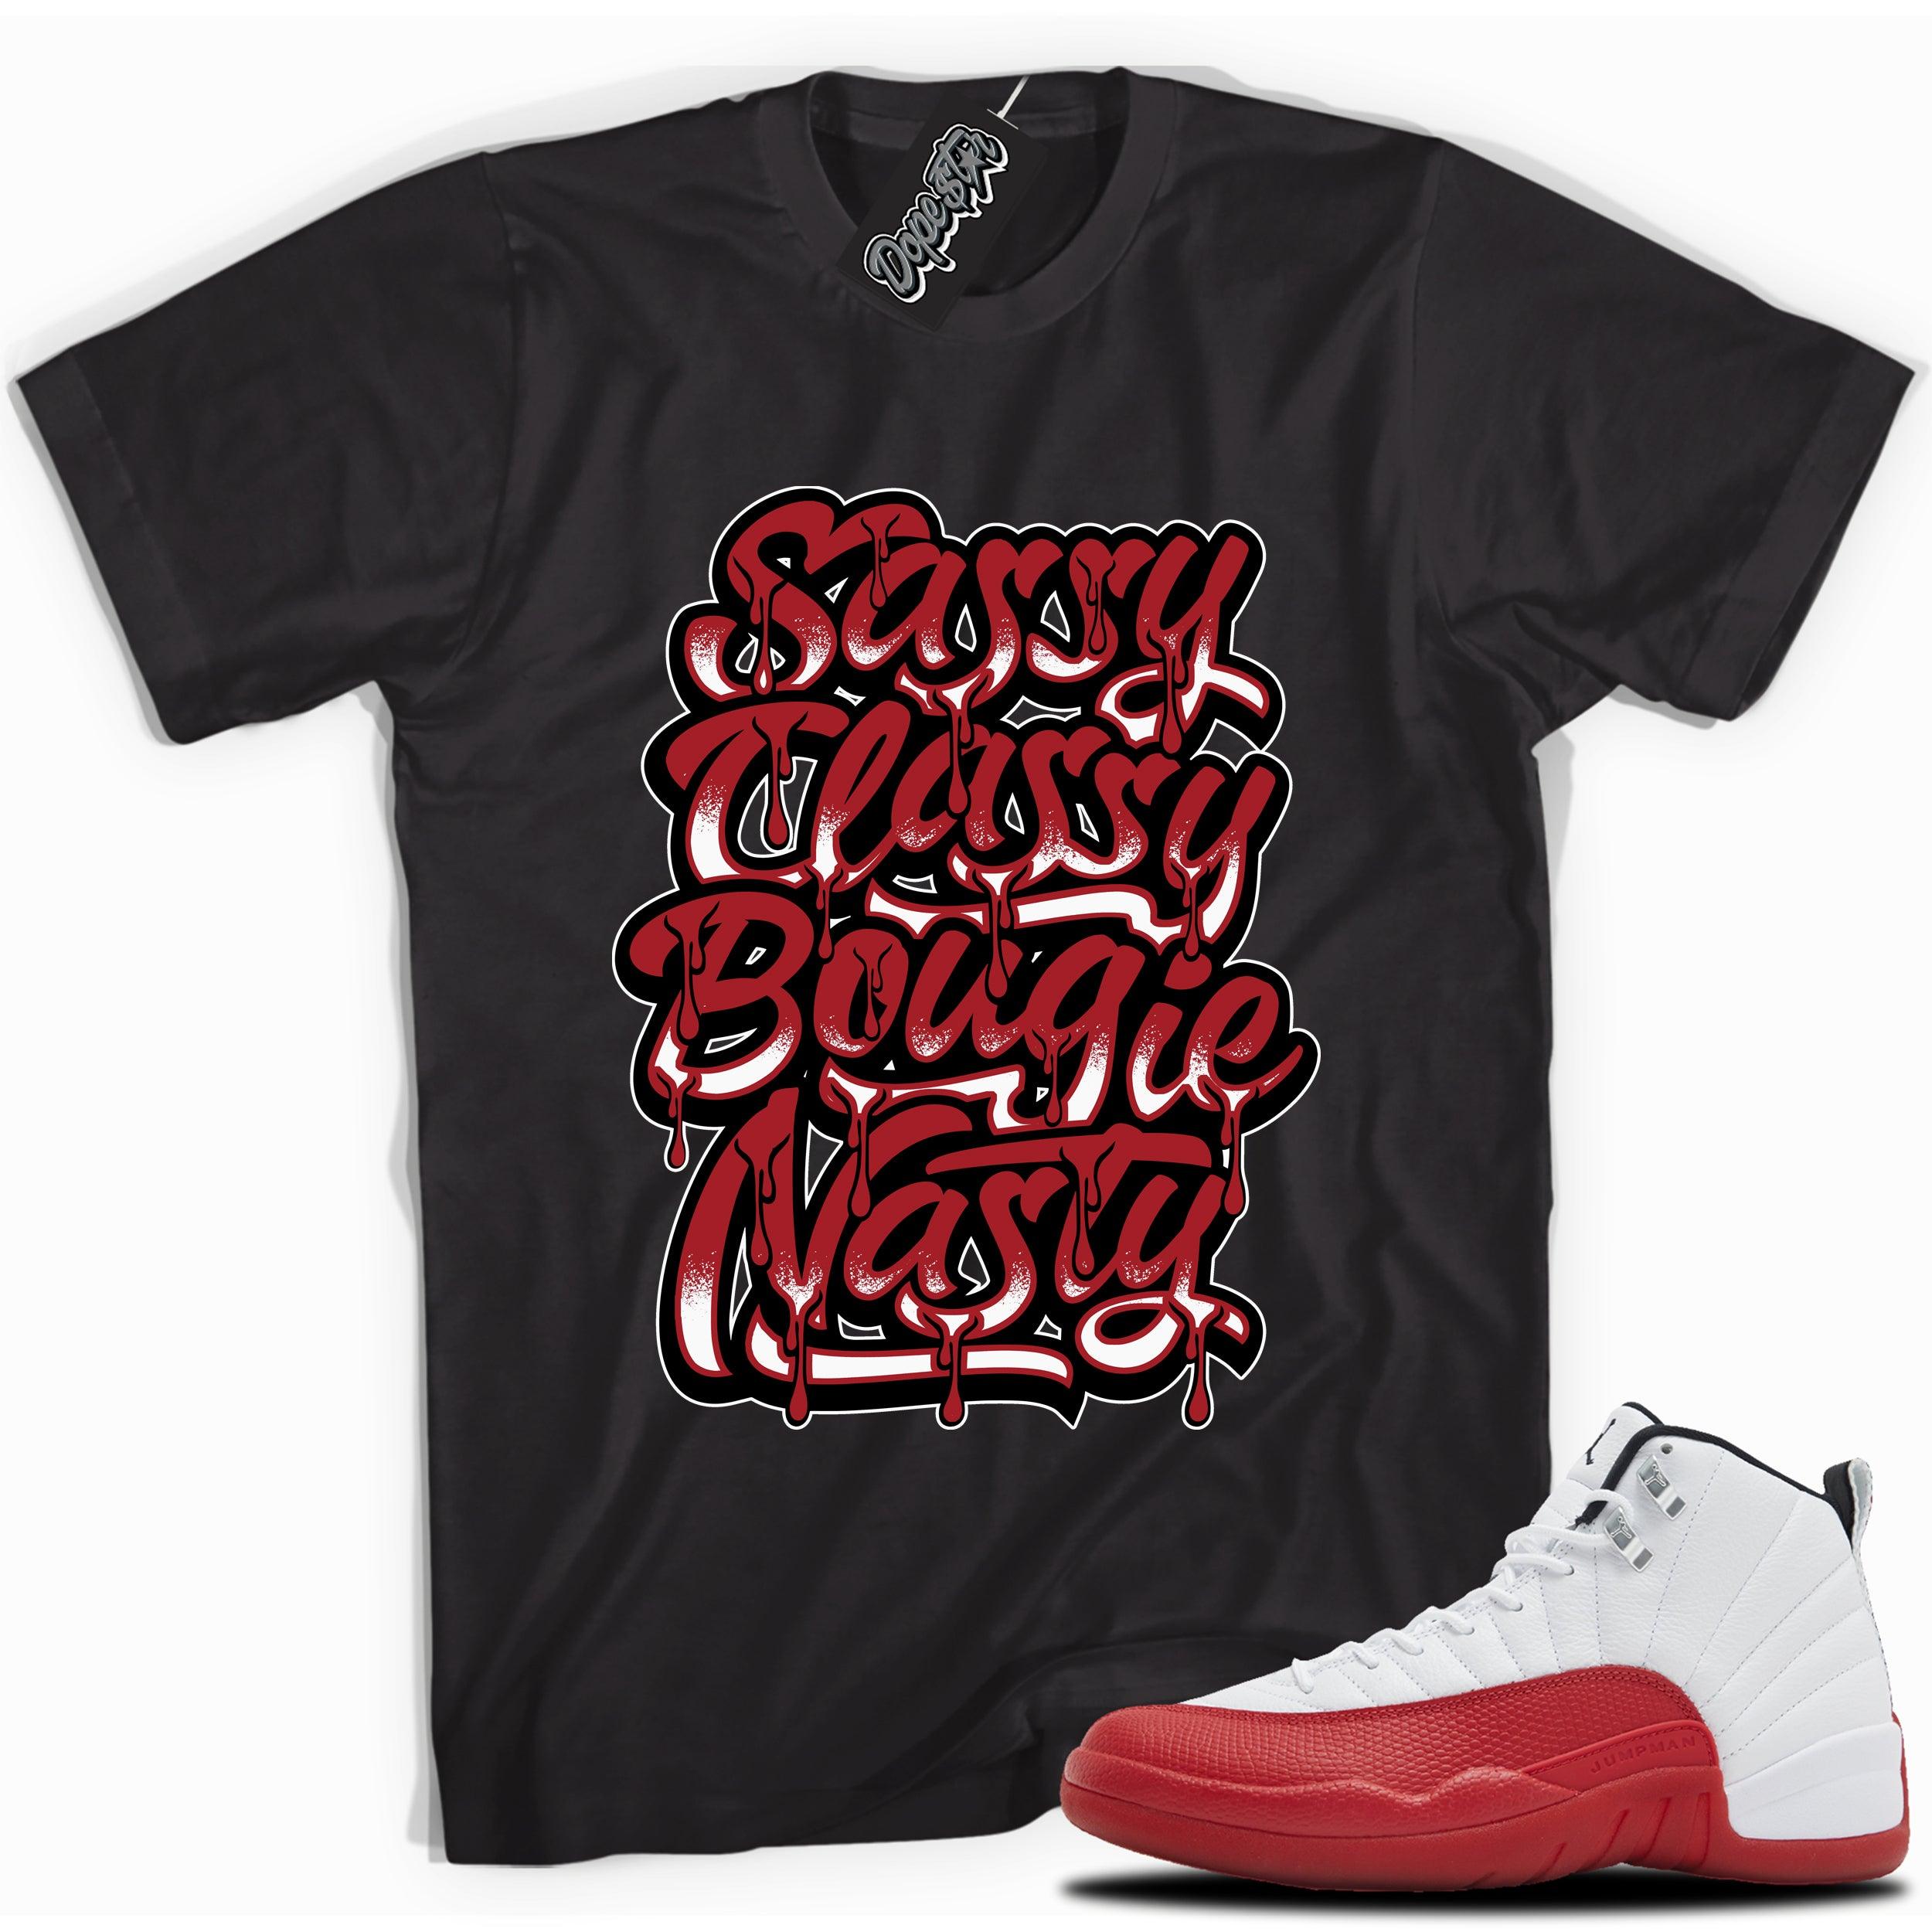 Cool Black graphic tee with “SASSY CLASSY” print, that perfectly matches Air Jordan 12 Retro Cherry Red 2023 red and white sneakers